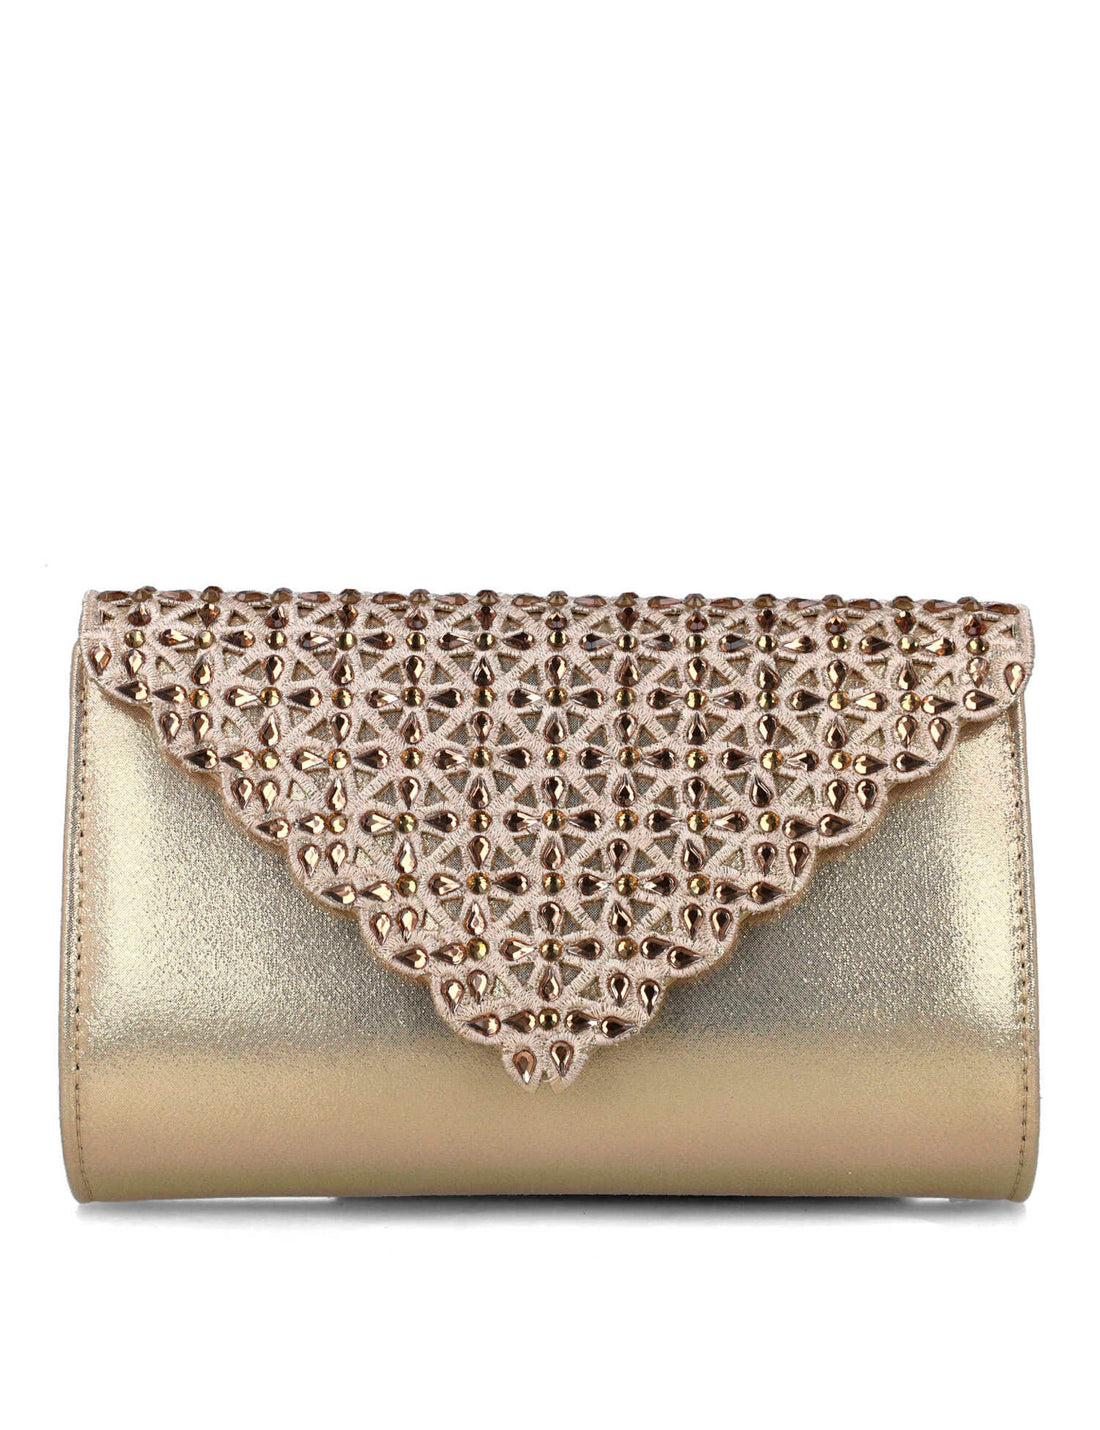 Gold Clutch With Embellished Flap_85540_00_01